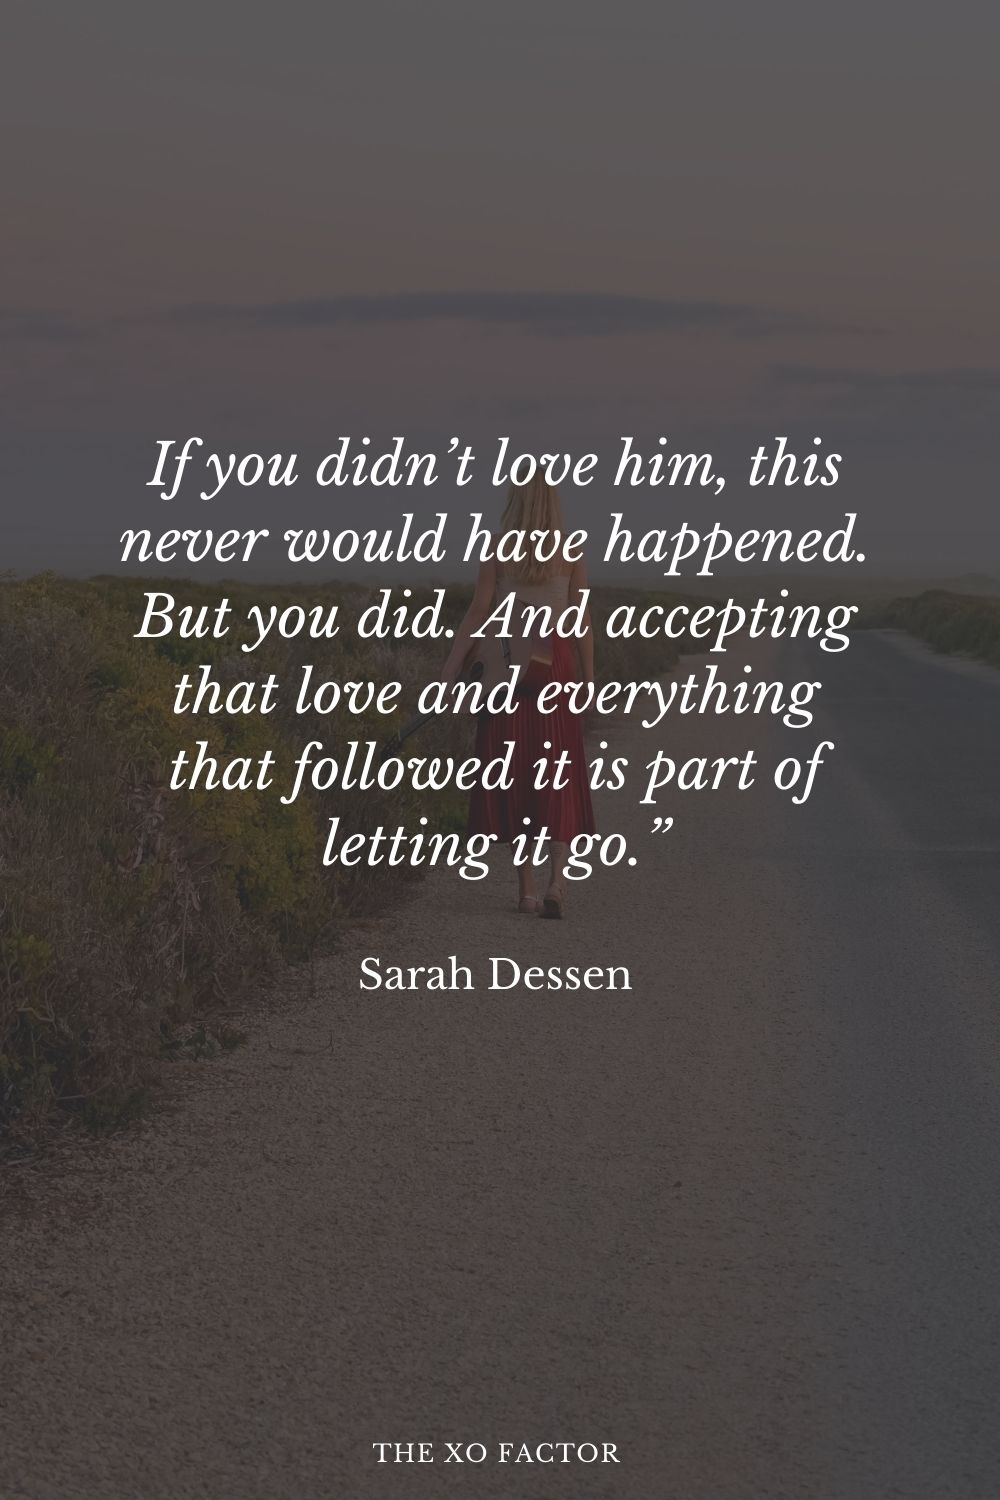 If you didn’t love him, this never would have happened. But you did. And accepting that love and everything that followed it is part of letting it go.” Sarah Dessen